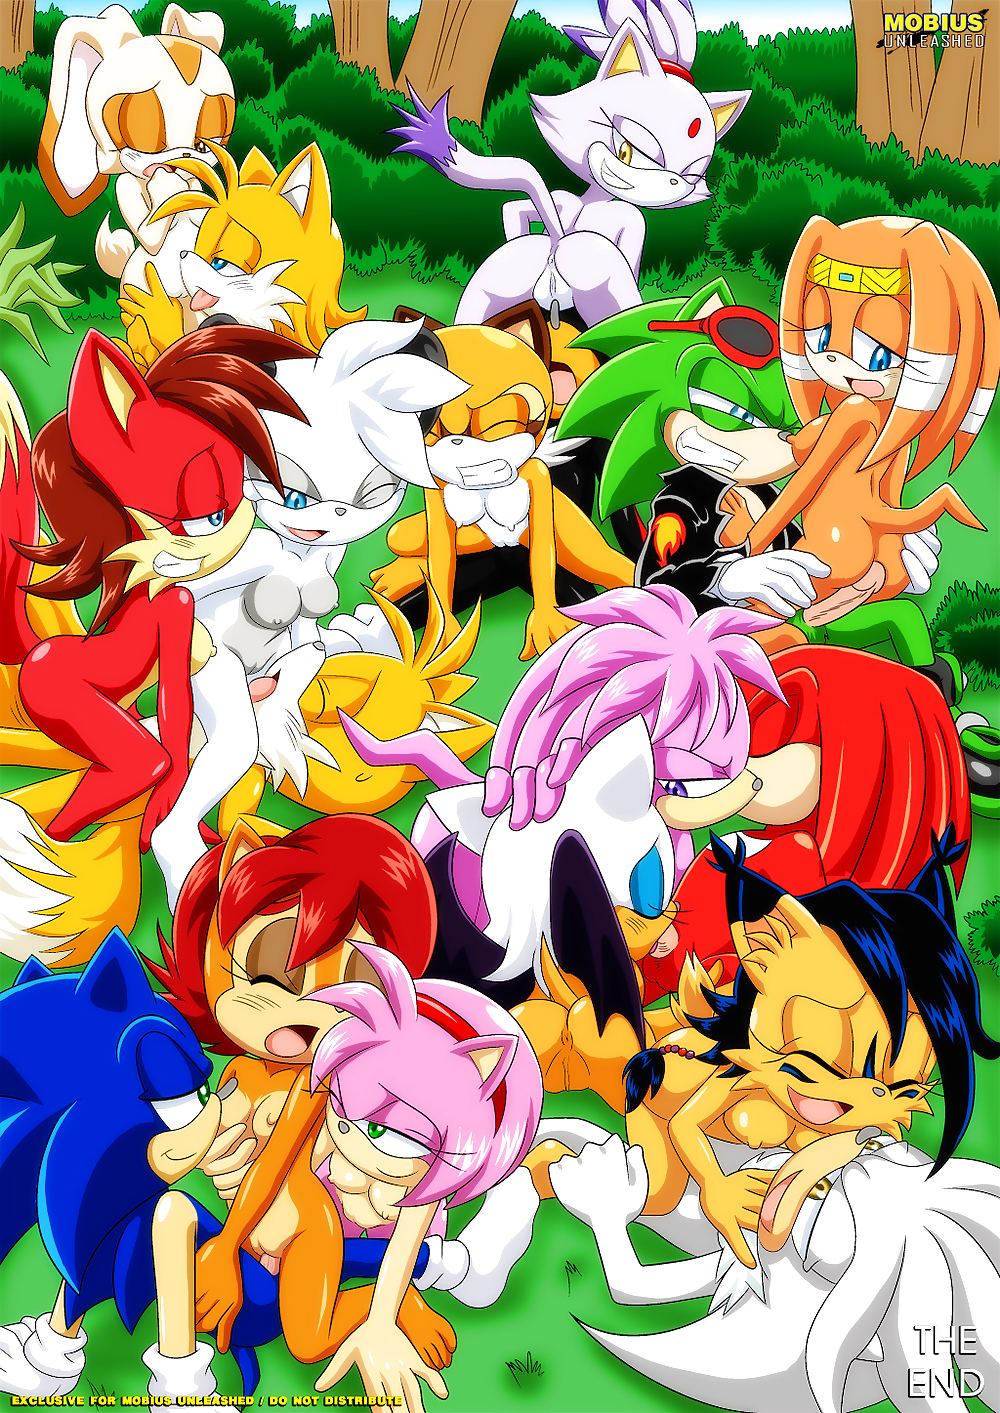 amy_rose anal bbmbbf blaze_the_cat comic cream_the_rabbit crystal_the_cat_(sonic) fellatio ffm_threesome fiona_fox full_color group_sex imminent_sex julie-su knuckles_the_echidna mighty_the_armadillo miles_"tails"_prower mobius_unleashed nicole_the_lynx rouge_the_bat sally_acorn scourge_the_hedgehog silver_the_hedgehog sonic_(series) sonic_boom sonic_the_hedgehog sonic_the_hedgehog_(series) sticks_the_jungle_badger tails_the_fox threesome tikal_the_echidna vaginal zoey_(sonic)